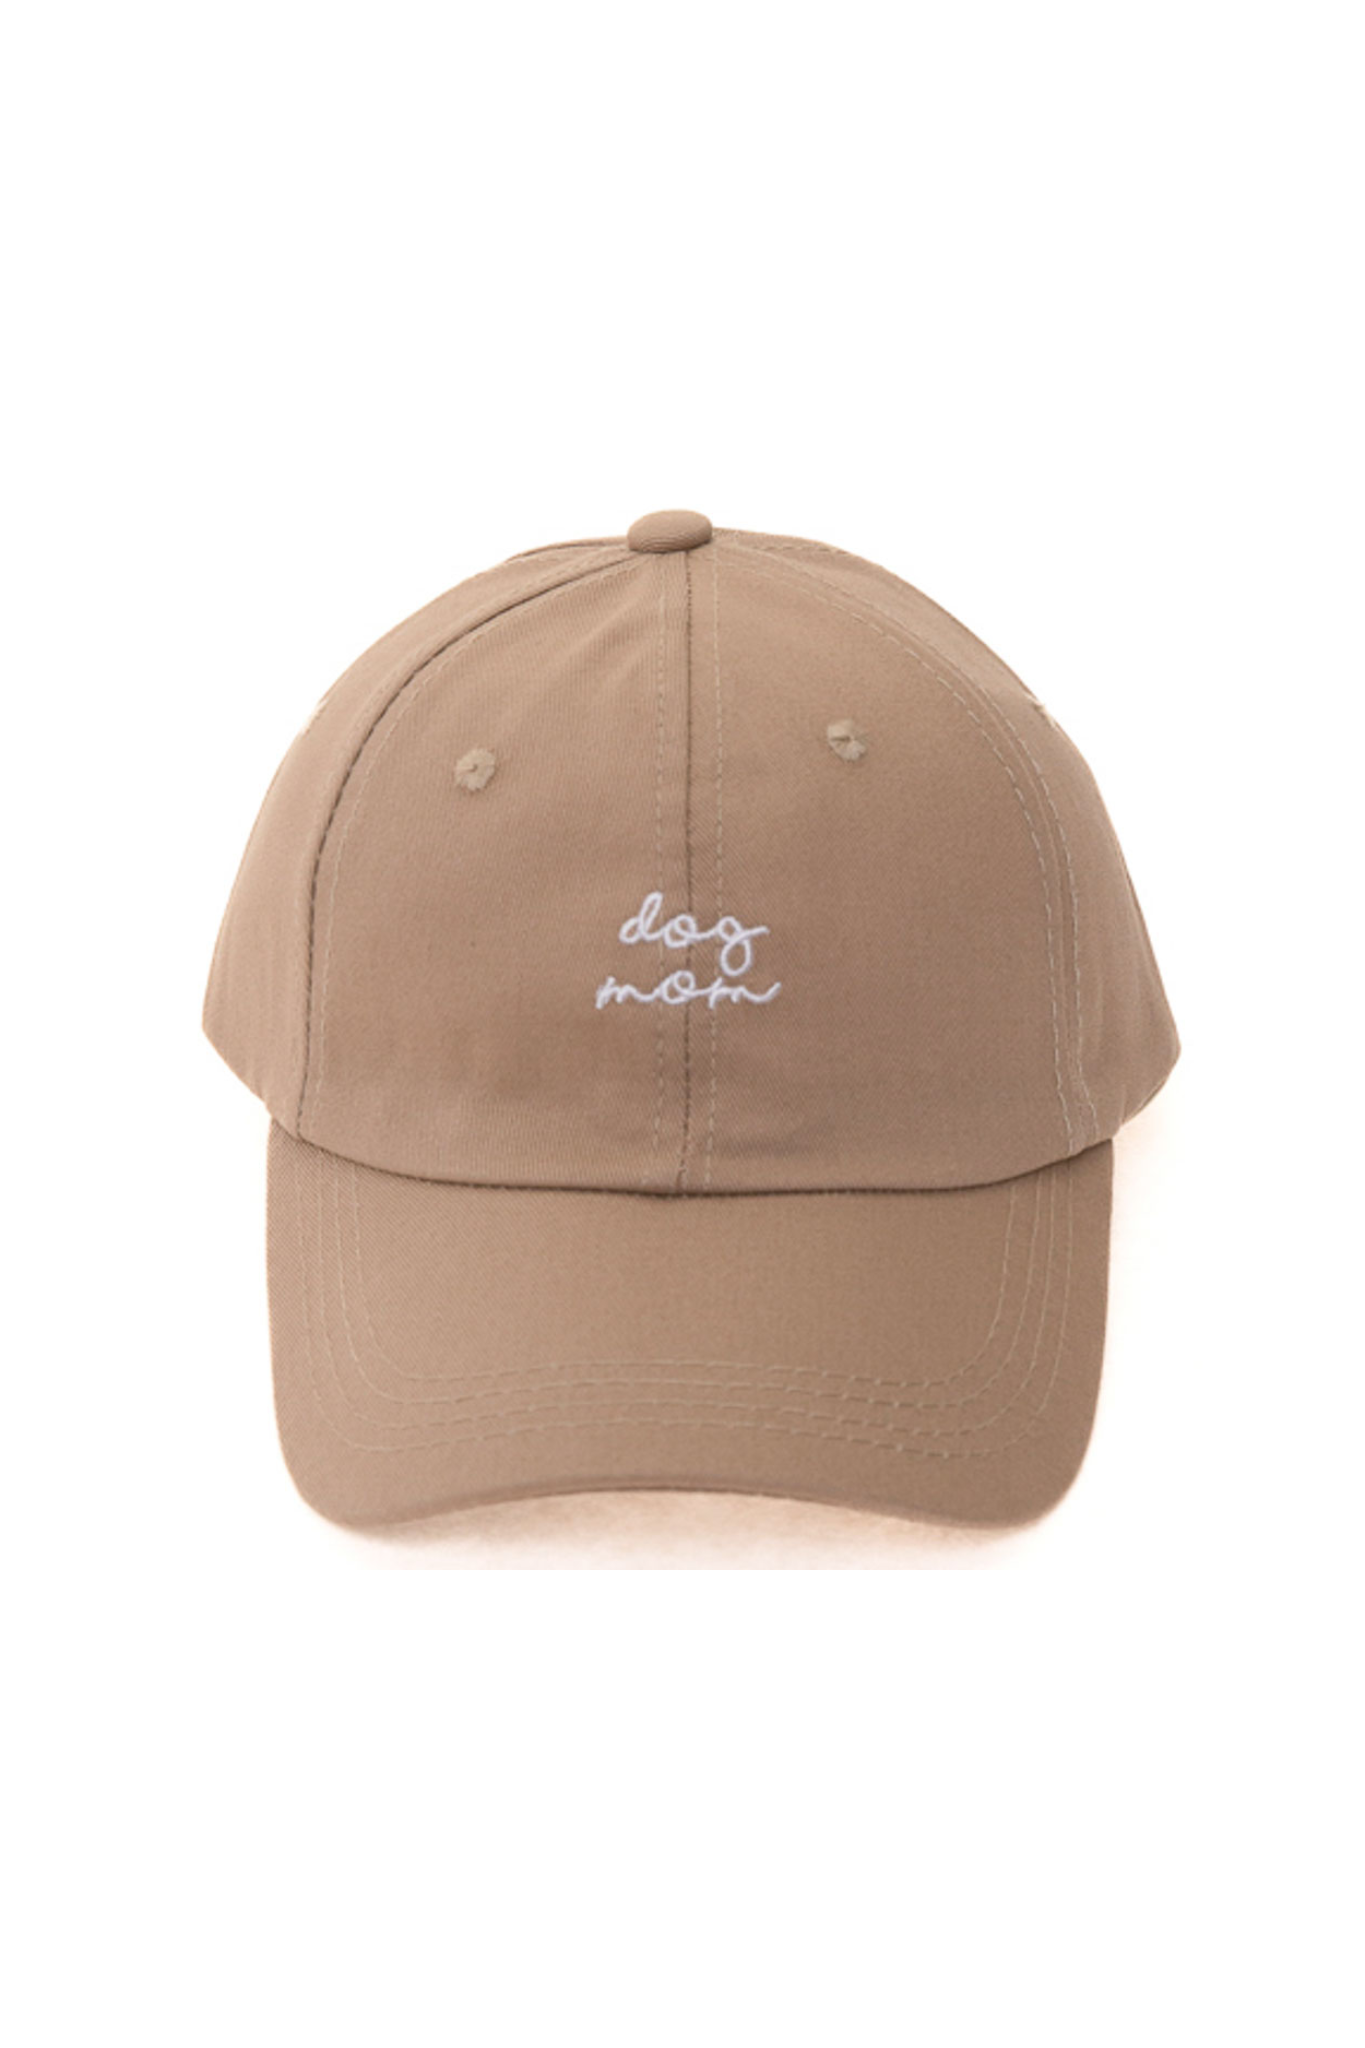 View 4 of Dog Mom Hat in Khaki, a Hats from Larrea Cove. Detail: .